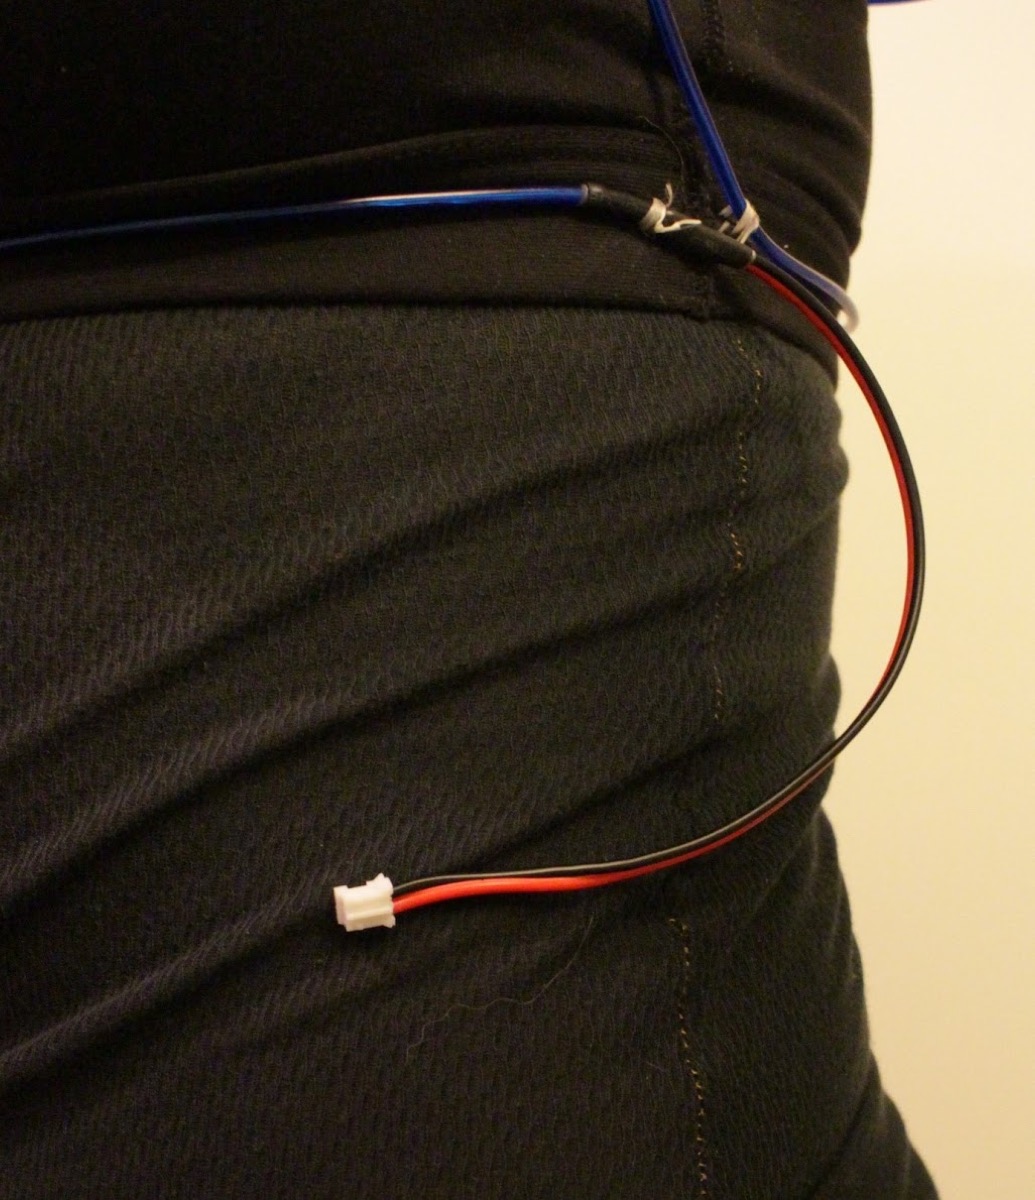 Modifying Your EL Wire Inverter - SparkFun Learn